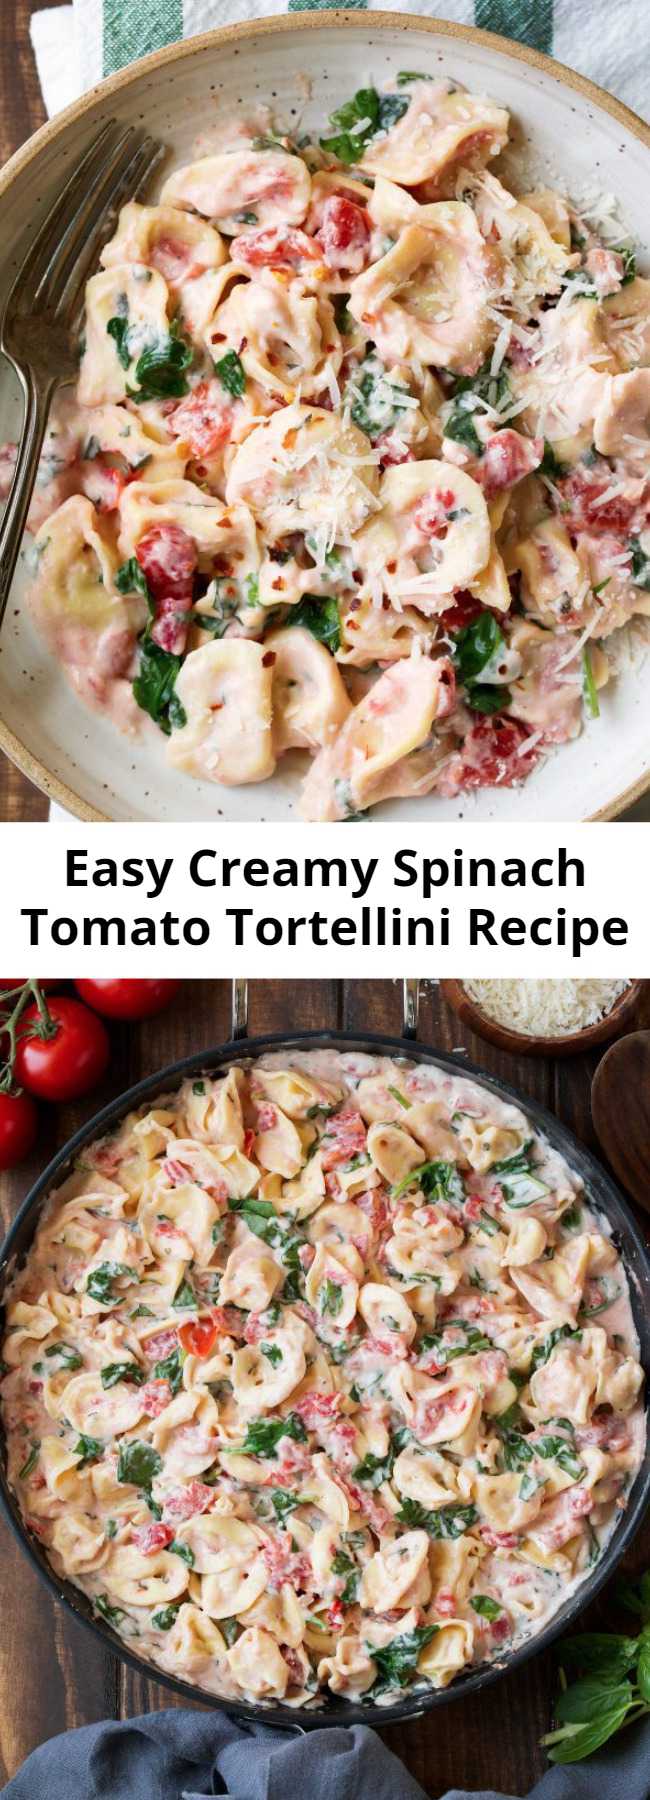 Easy Creamy Spinach Tomato Tortellini Recipe - This Creamy Spinach Tomato Tortellini is so simple and comforting plus its impressive enough to serve to guests when entertaining or to simply curl up with on the sofa. Either way, you'll love it!